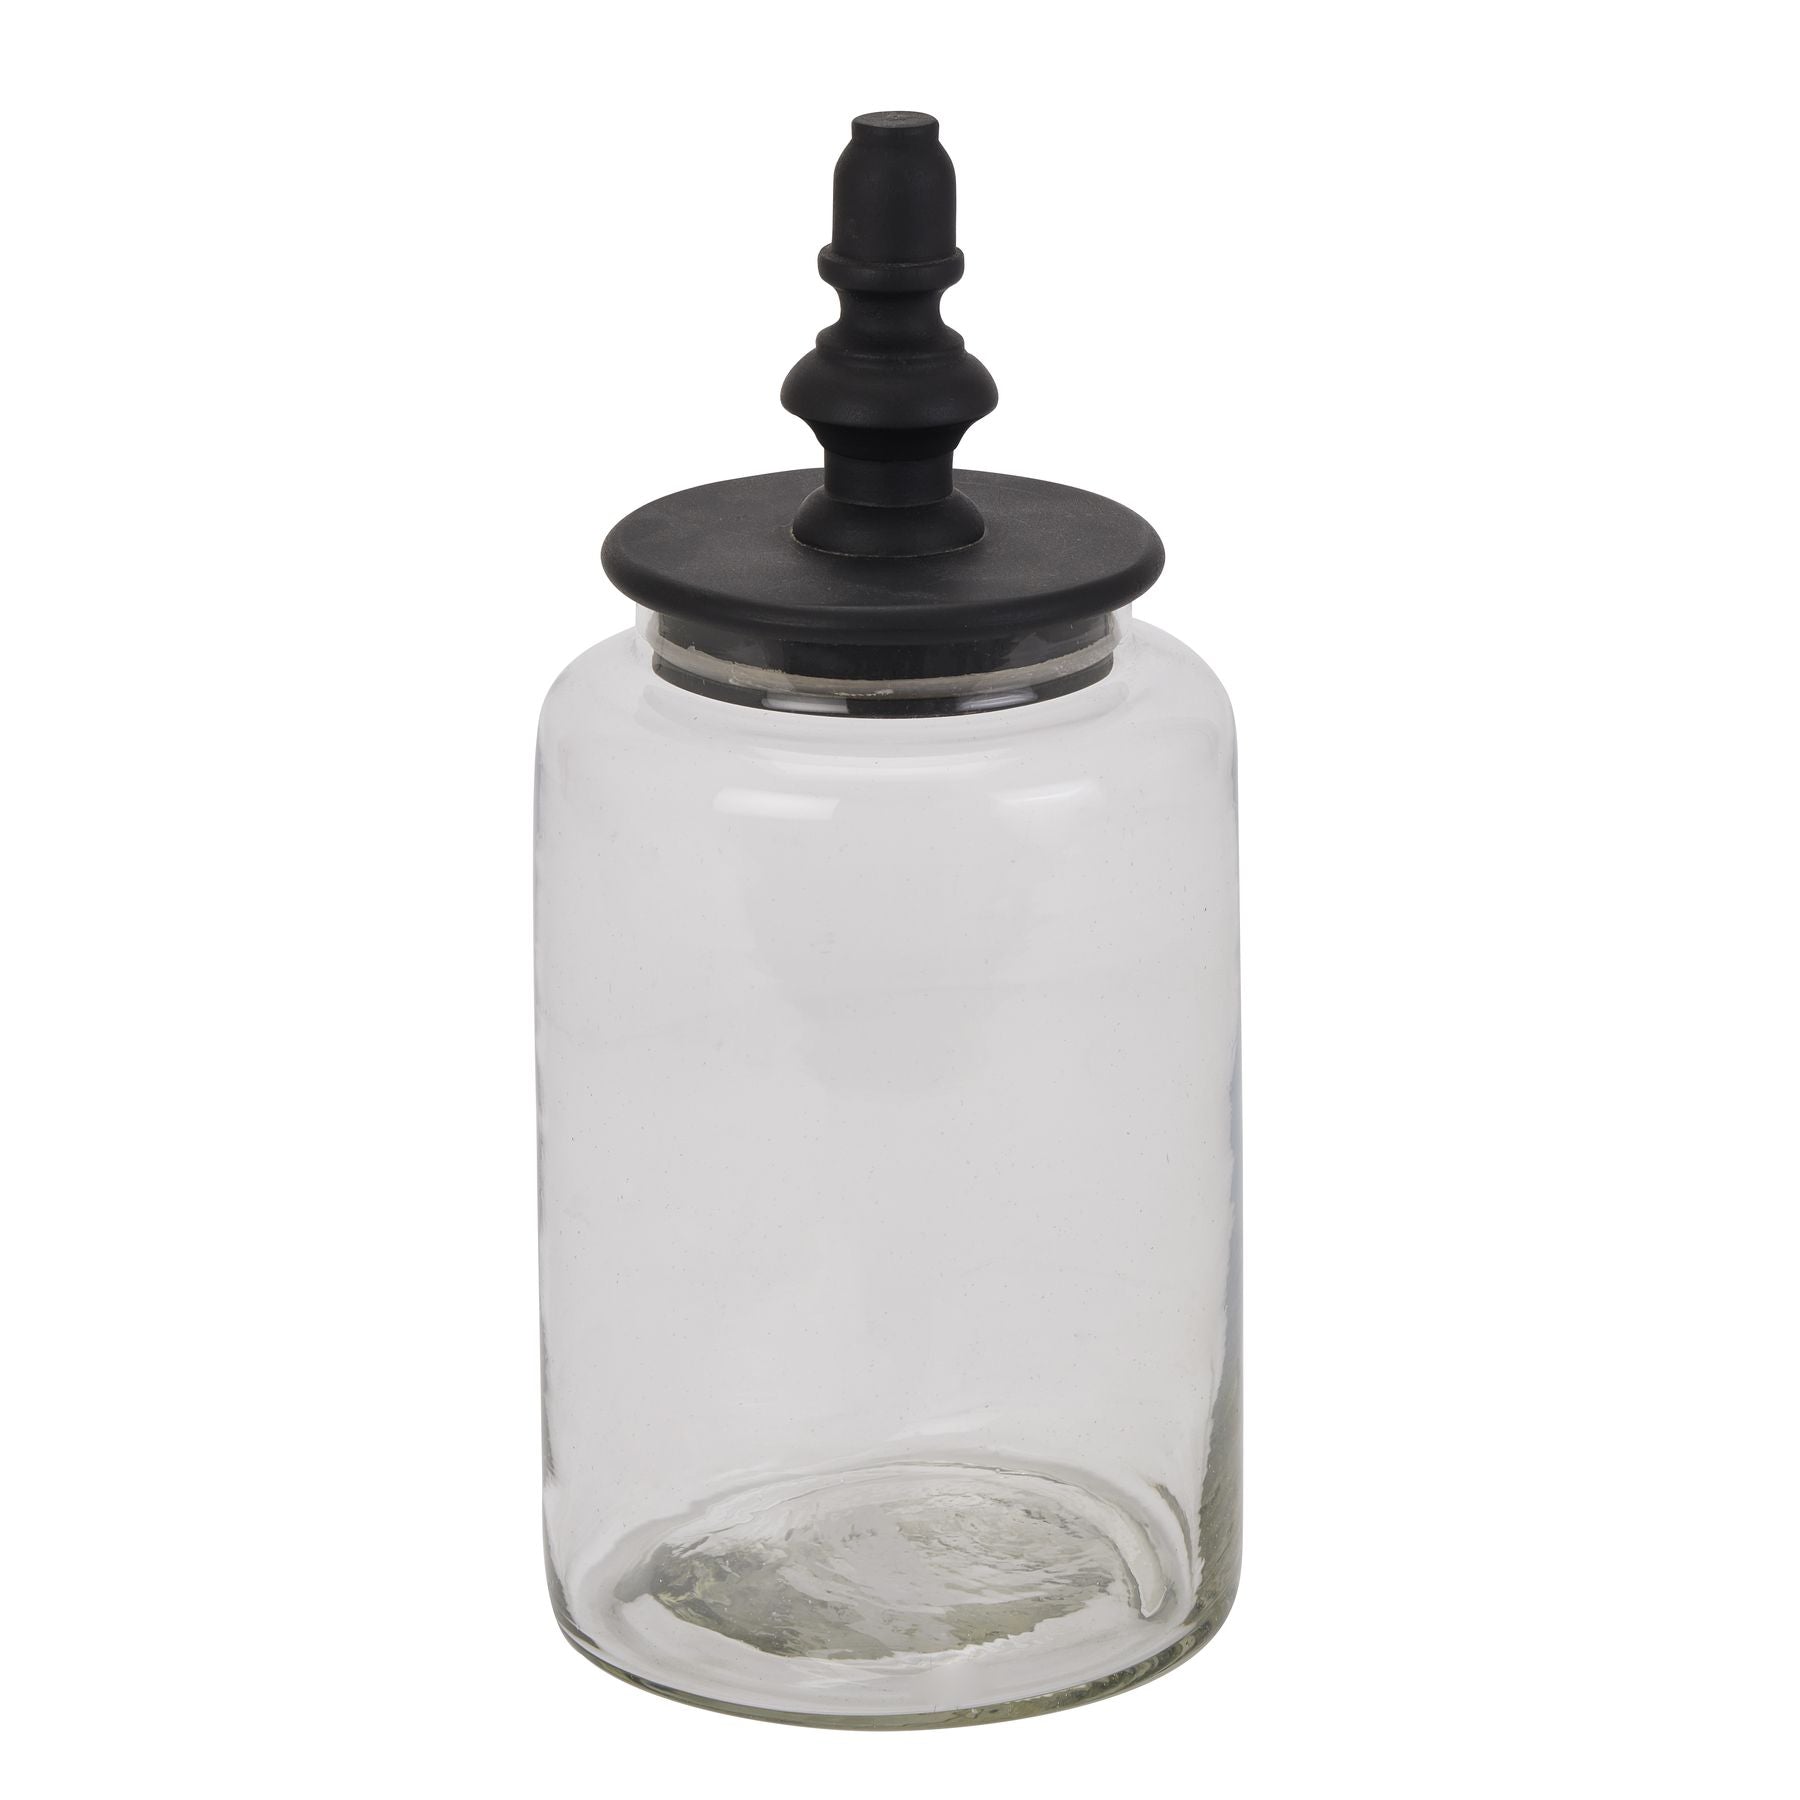 View Black Finial Tall Glass Canister information